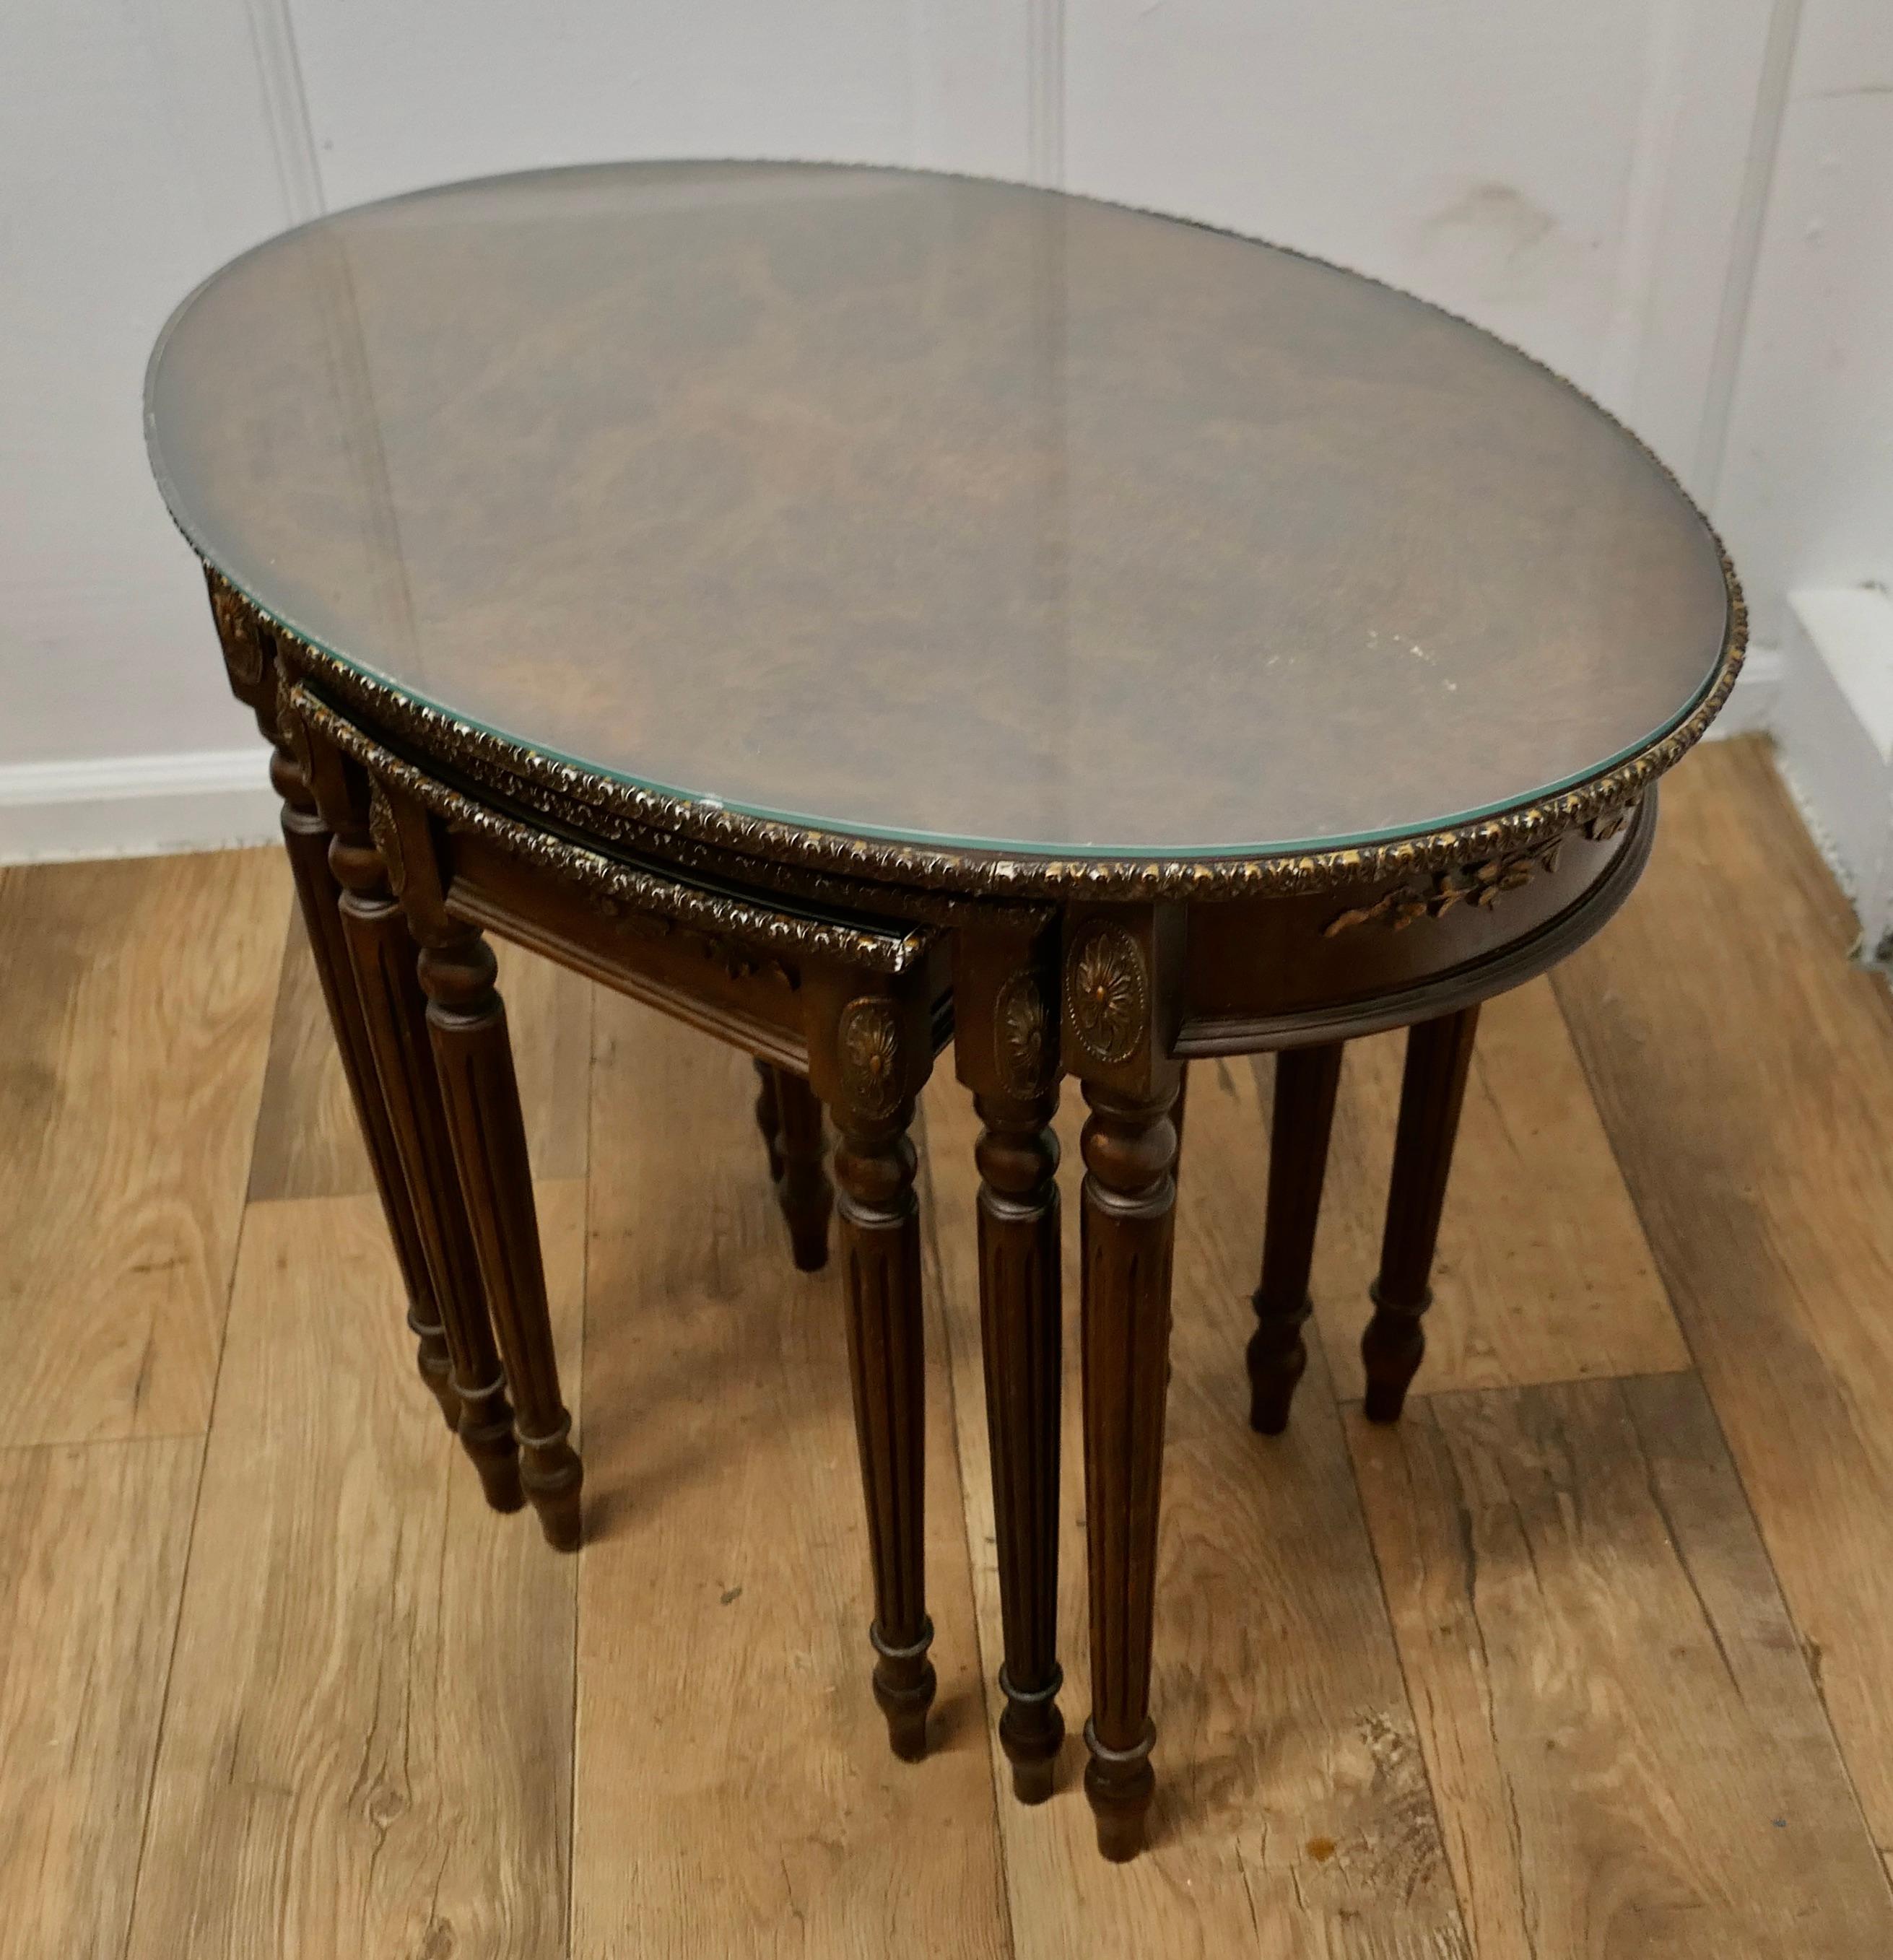 Decorative Burr Walnut Nest of Tables

This is a very Good-looking set of tables, the largest table is Oval in shape and they all have original protective glass tops
The nest is a set of 3 figured walnut veneered tables with a carved gilded